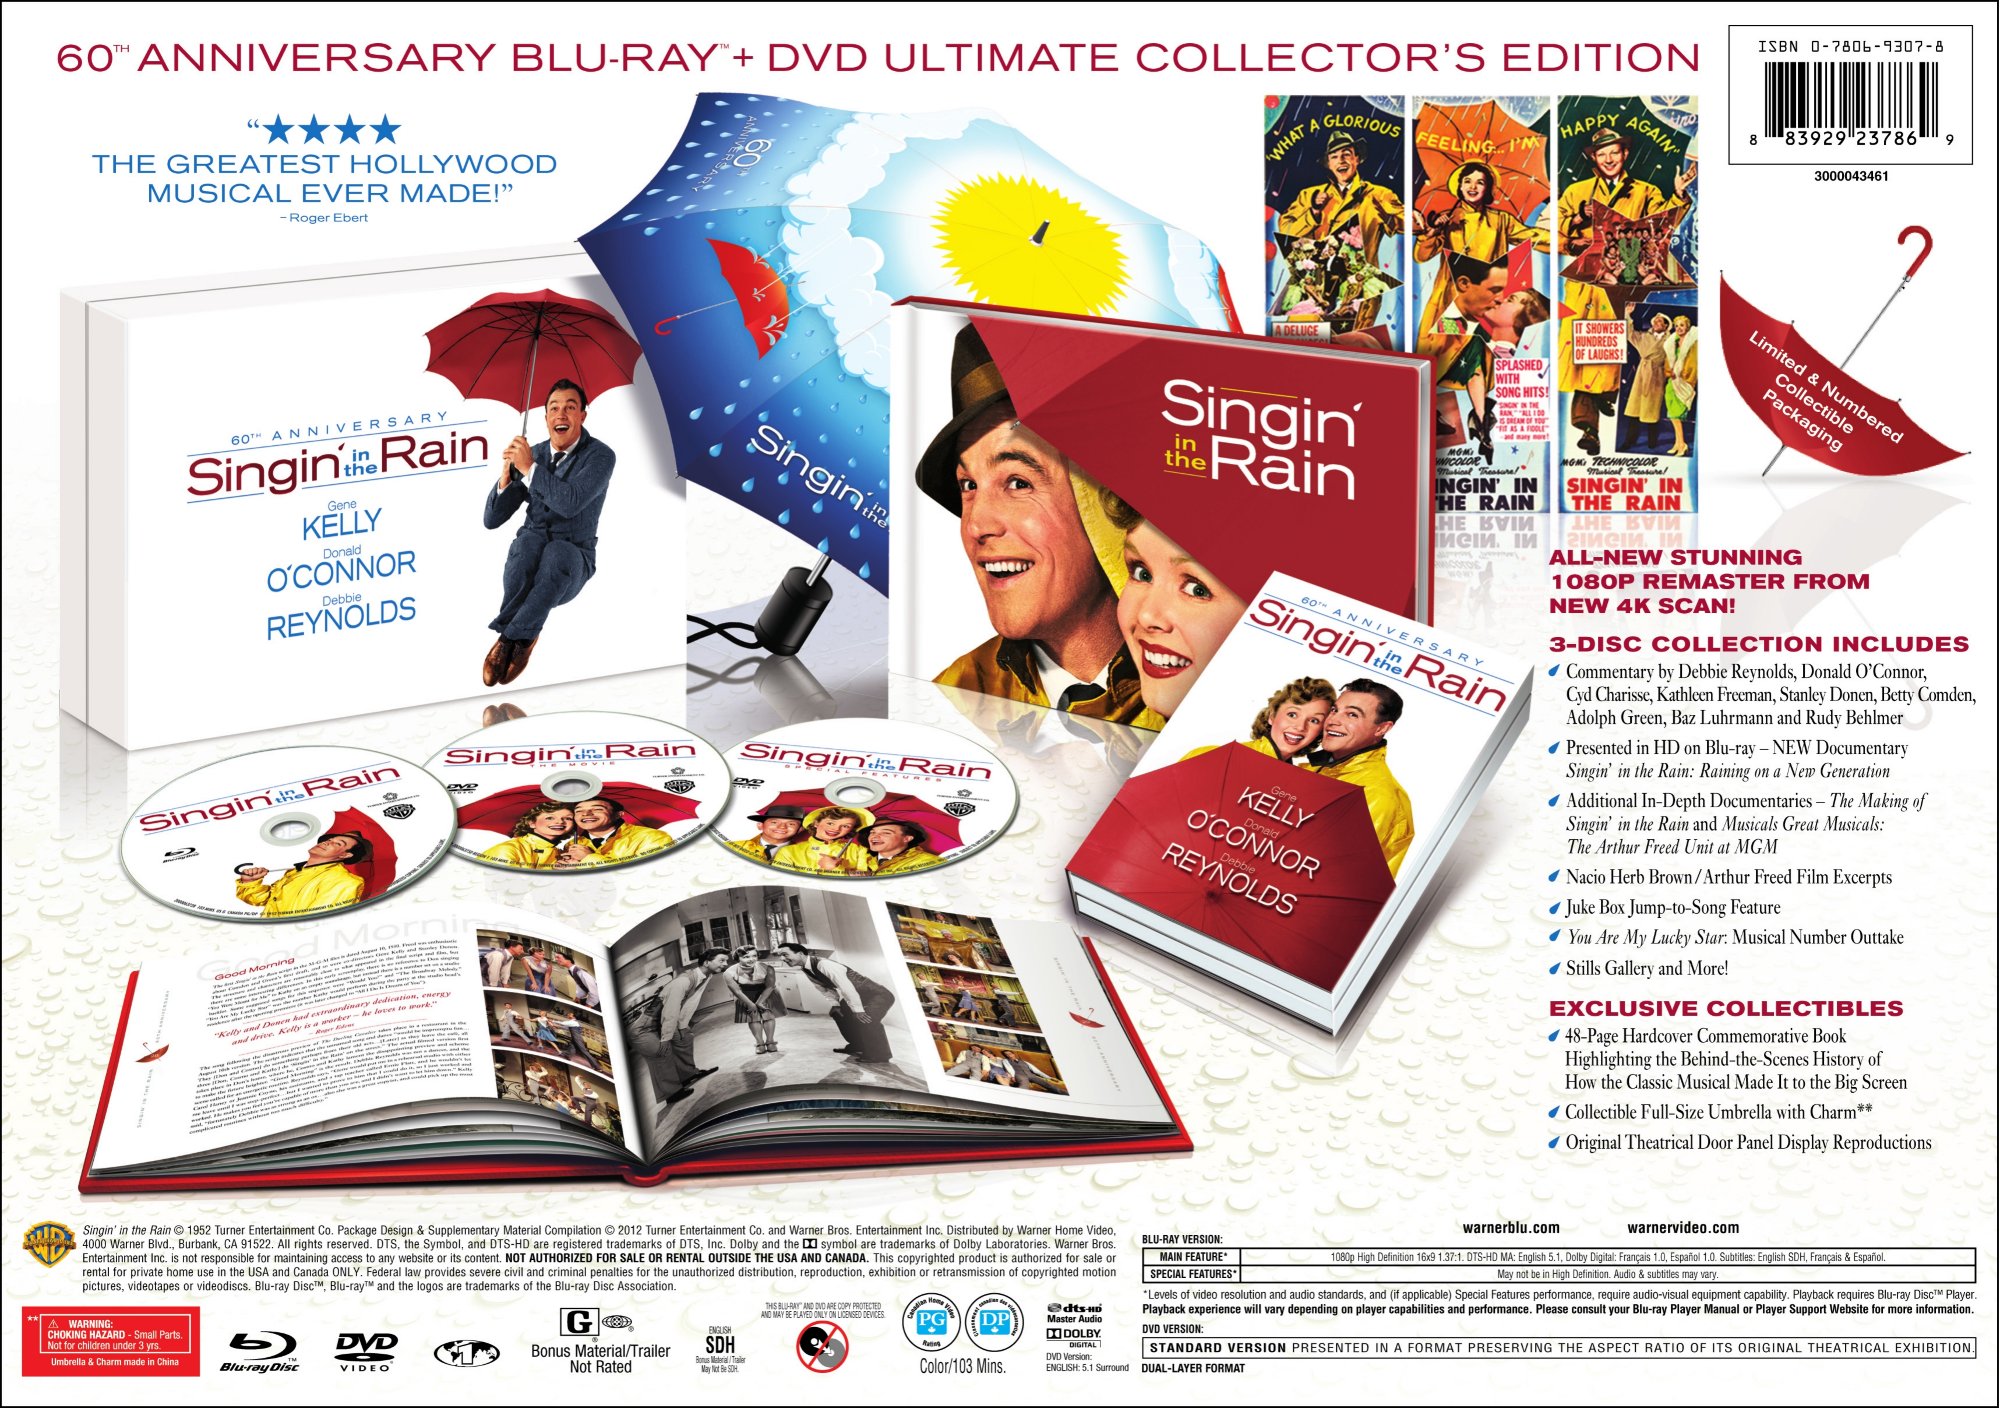 Singin' In the Rain: 60th Anniversary Ultimate Collector's Edition (Blu-ray + DVD) - image 3 of 3